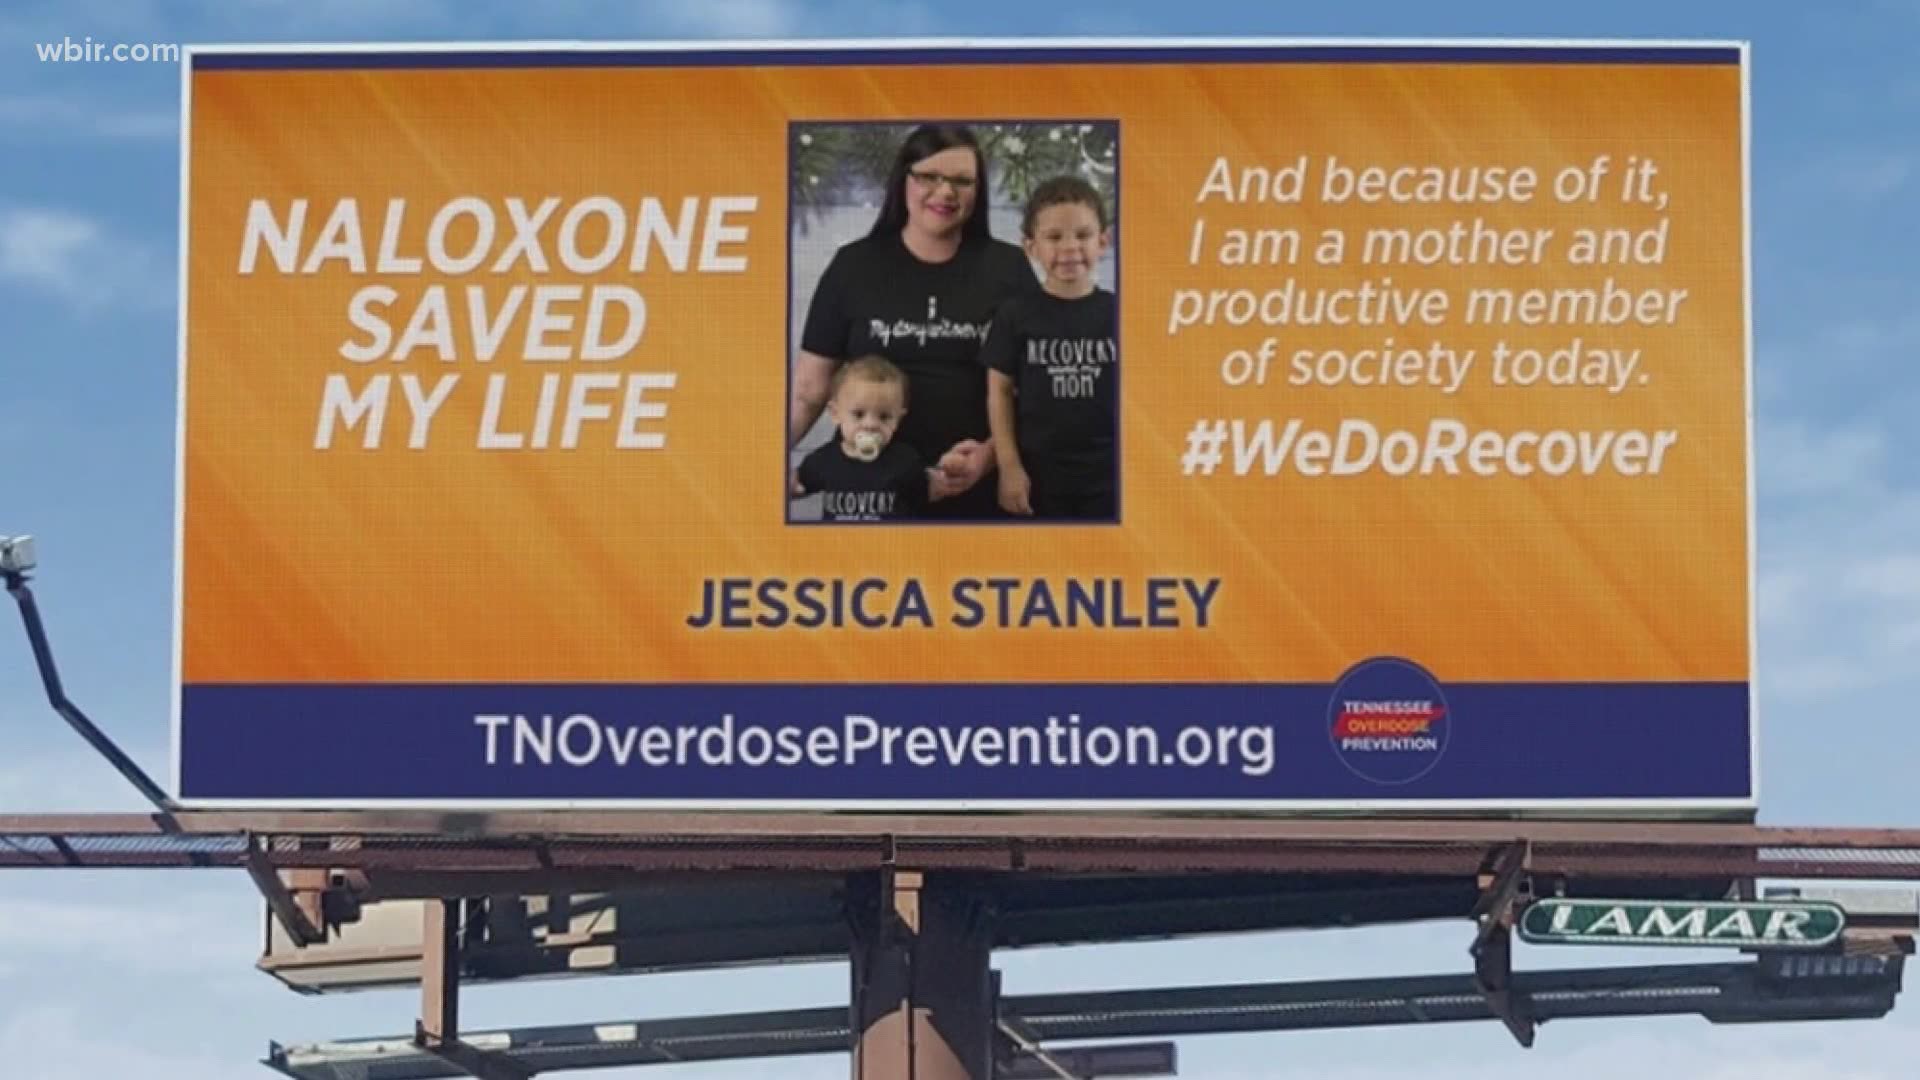 ACROSS THE STATE, THERE ARE MORE THAN A DOZEN BILLBOARDS SHARING MESSAGES OF HOPE AND LOSS IN HONOR OF INTERNATIONAL OVERDOSE AWARENESS DAY.